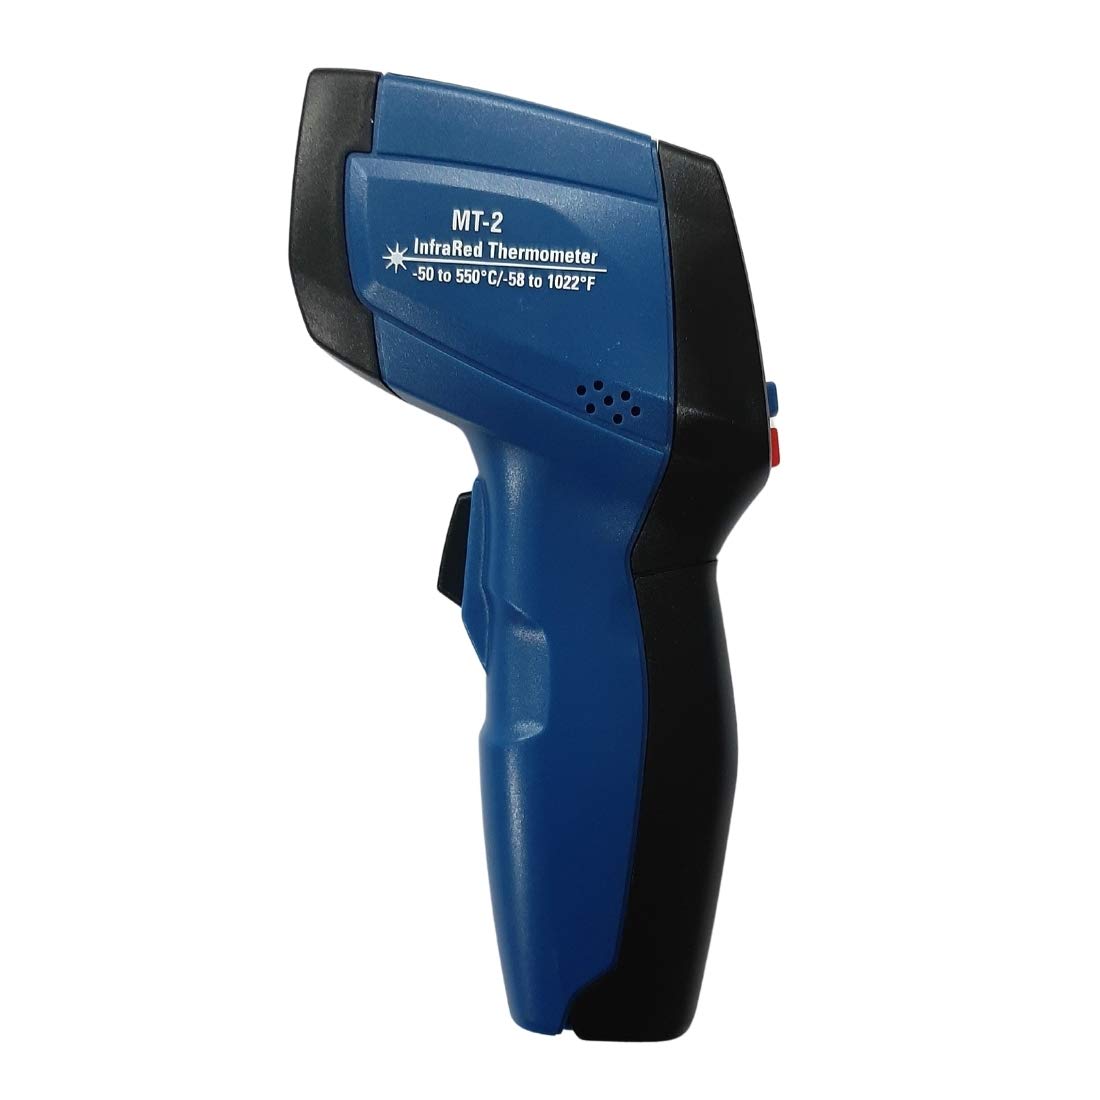 Metravi MT-2 Digital Non-contact Infrared Pyrometer Industrial Thermometer -50Â° to 550Â°C with Laser Sighting